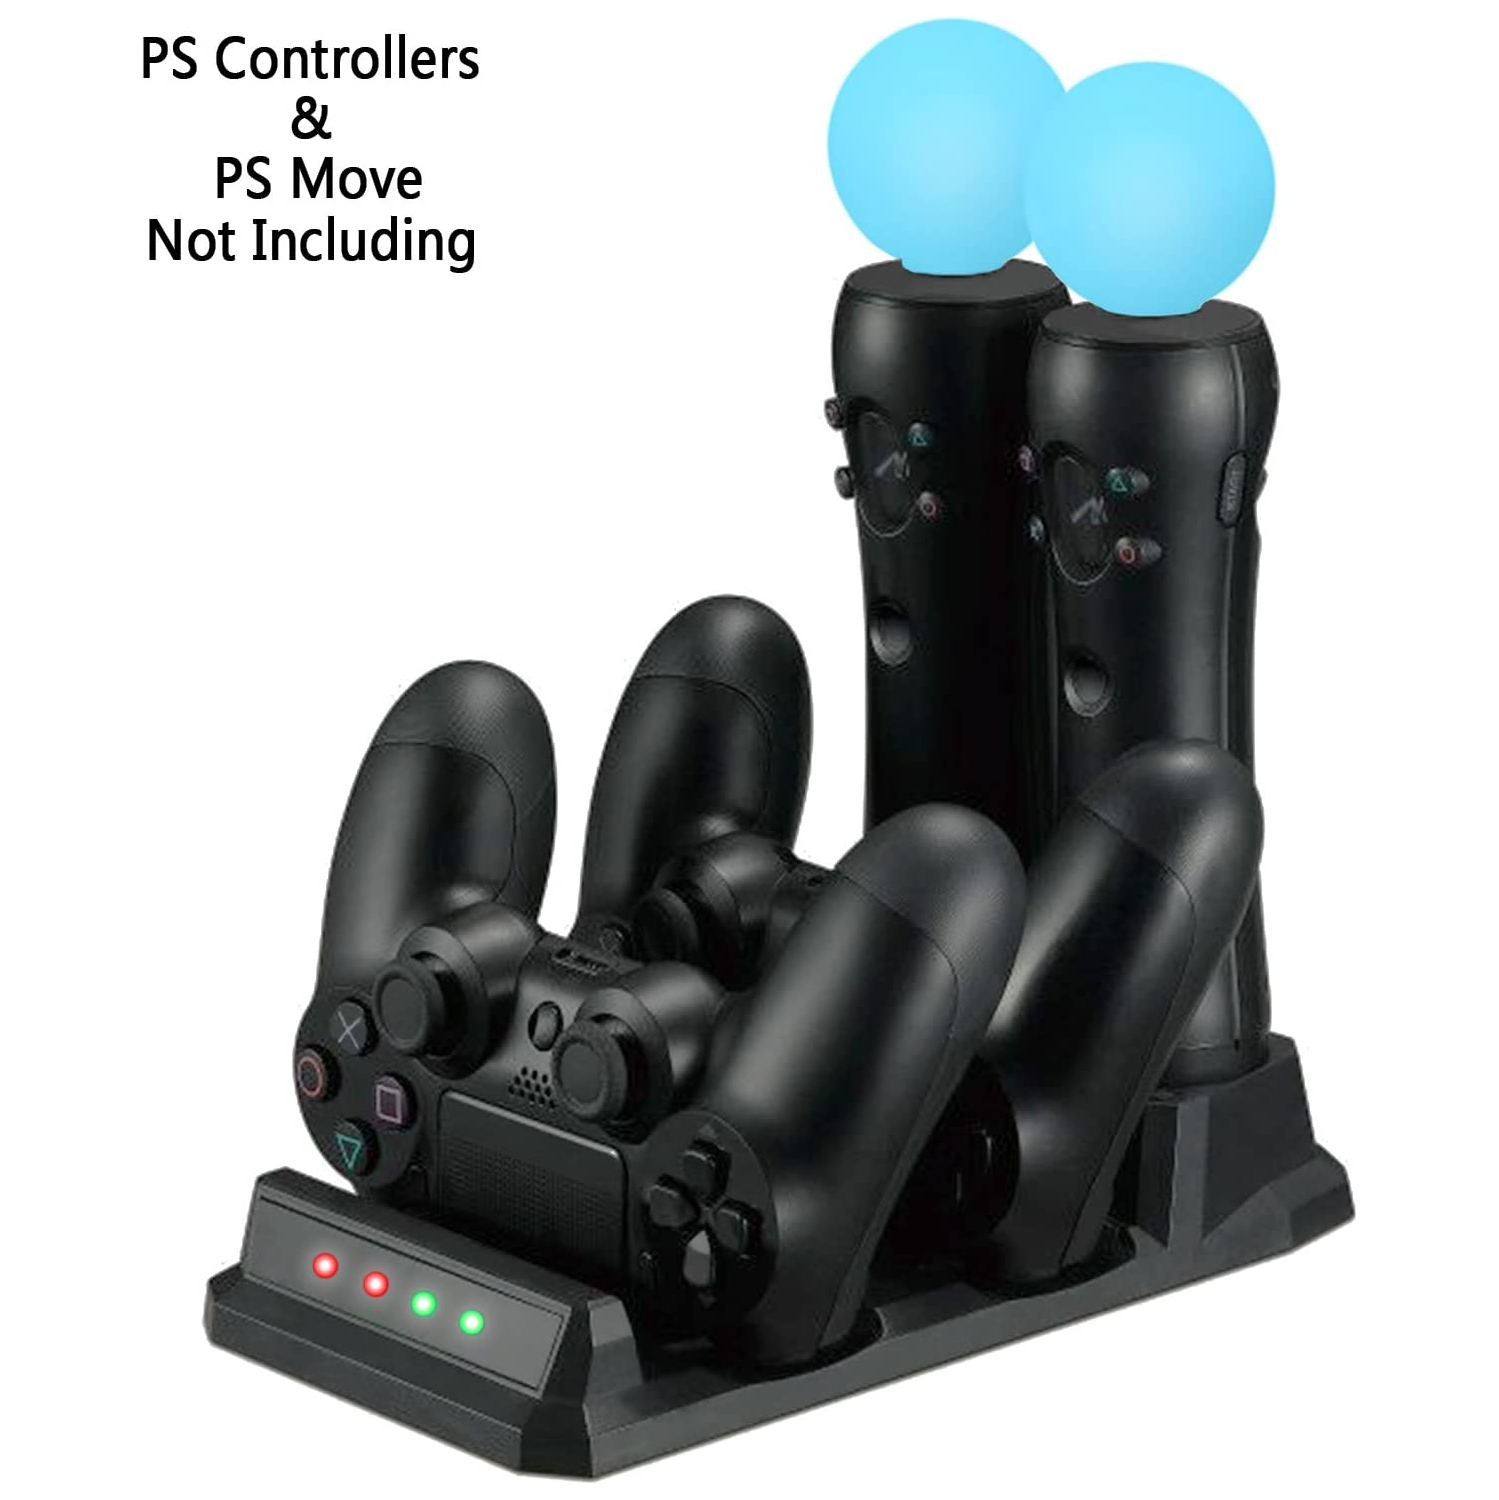 navor Quad Charging Station for PS Move Motion and PS4 Controller of SONY Playstation 4 PS4 Slim PS4 Pro (Quad Charger)